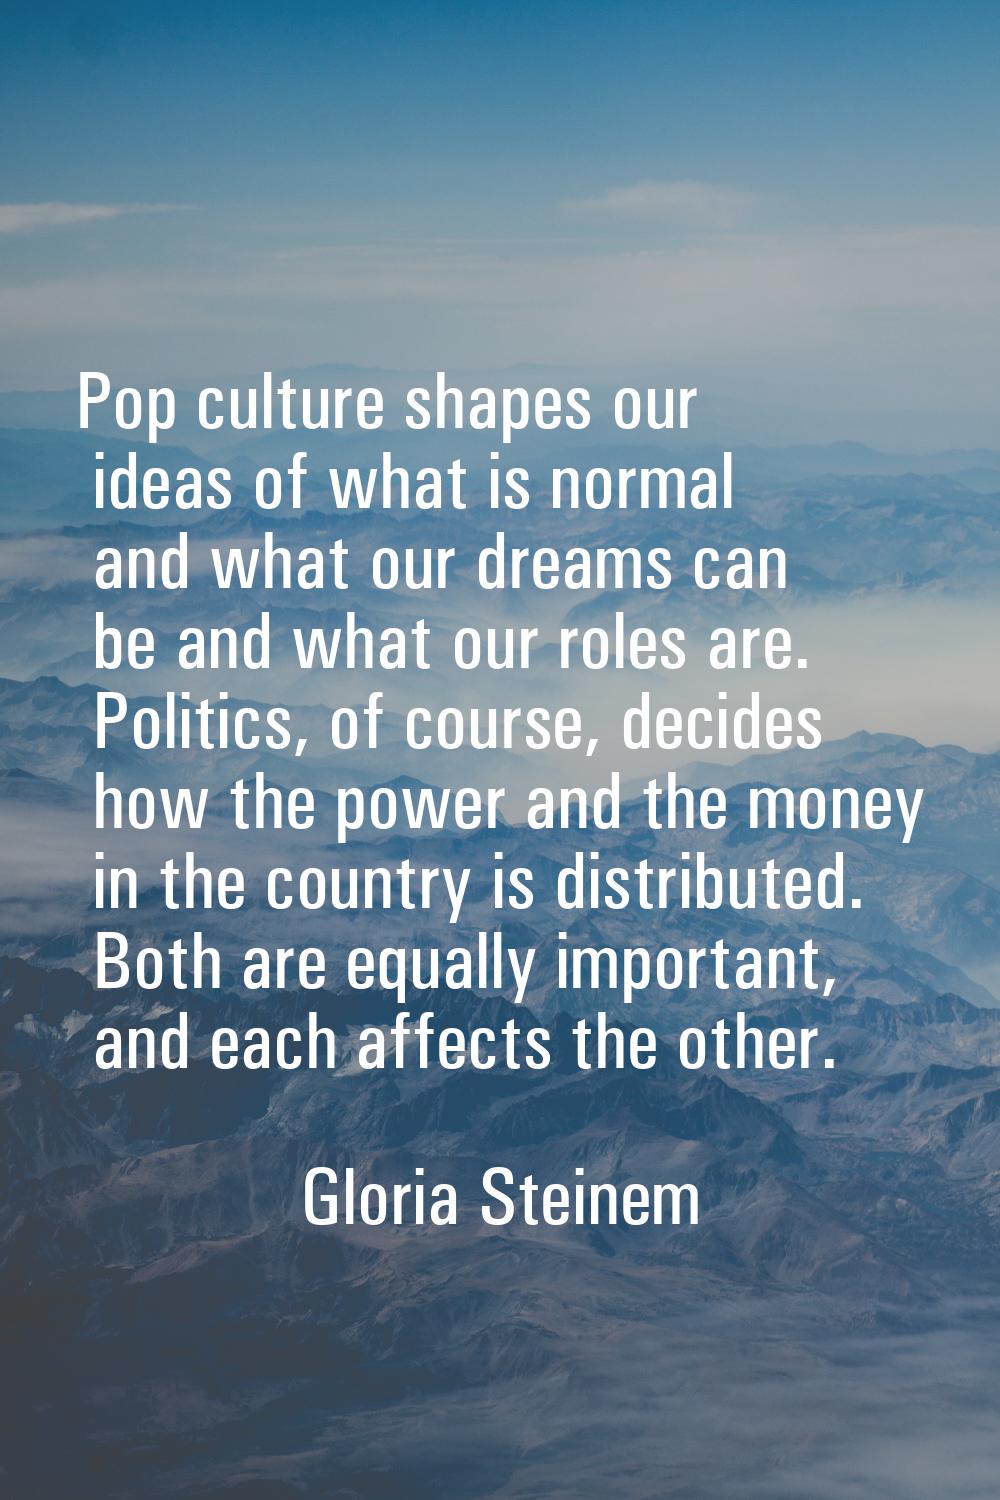 Pop culture shapes our ideas of what is normal and what our dreams can be and what our roles are. P